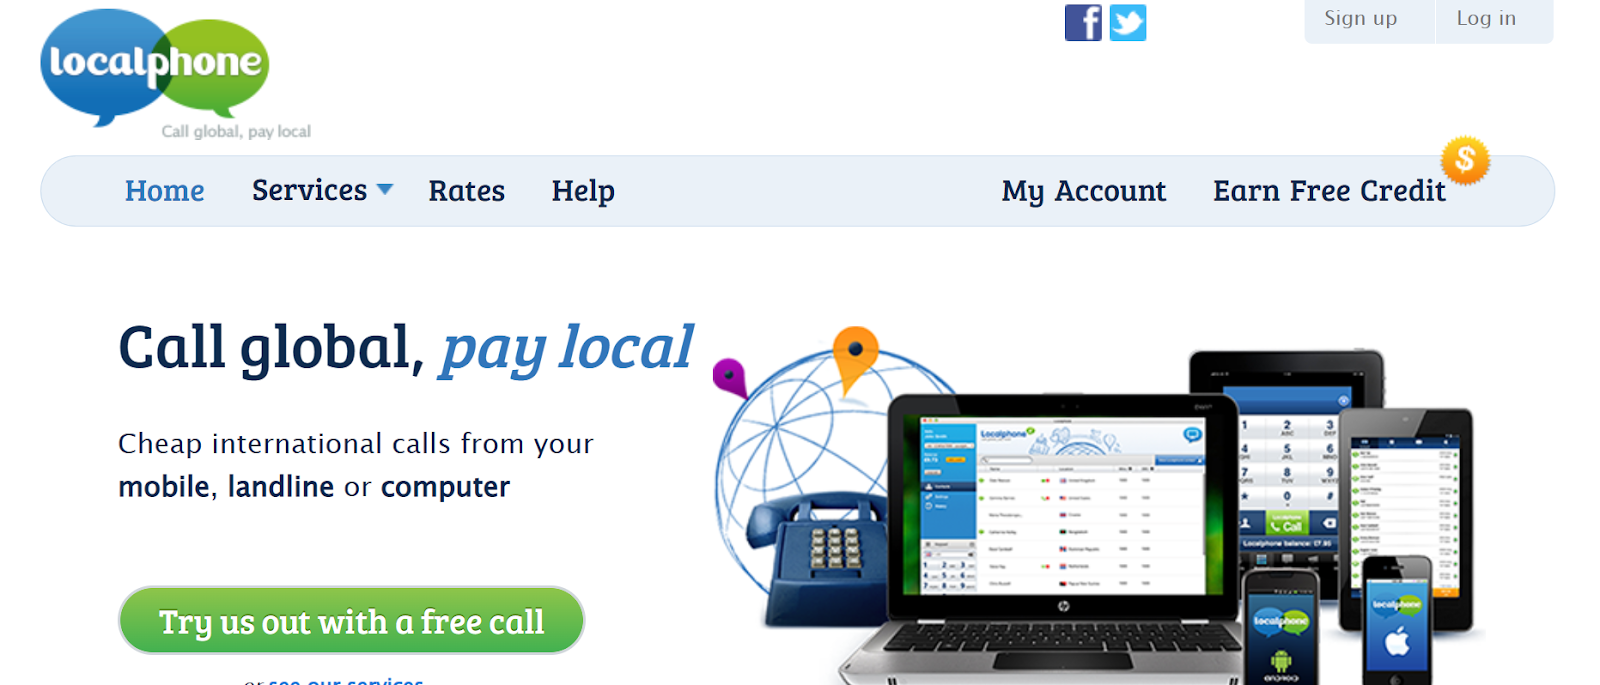 Localphone website snapshot highlighting the services it offers.